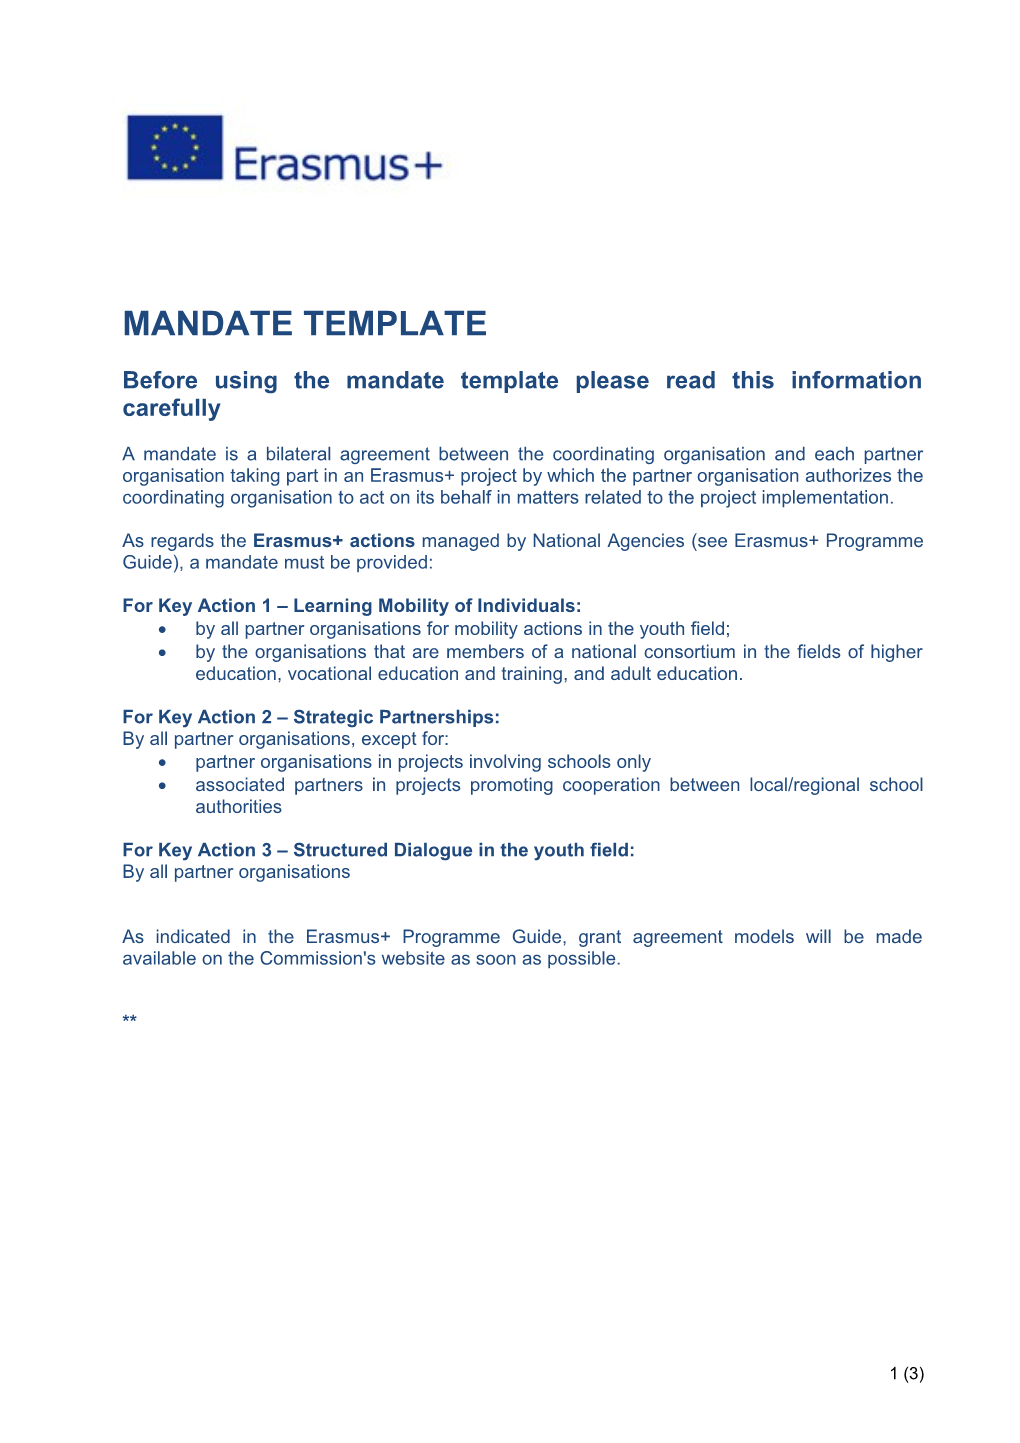 Before Using the Mandate Template Please Read This Information Carefully